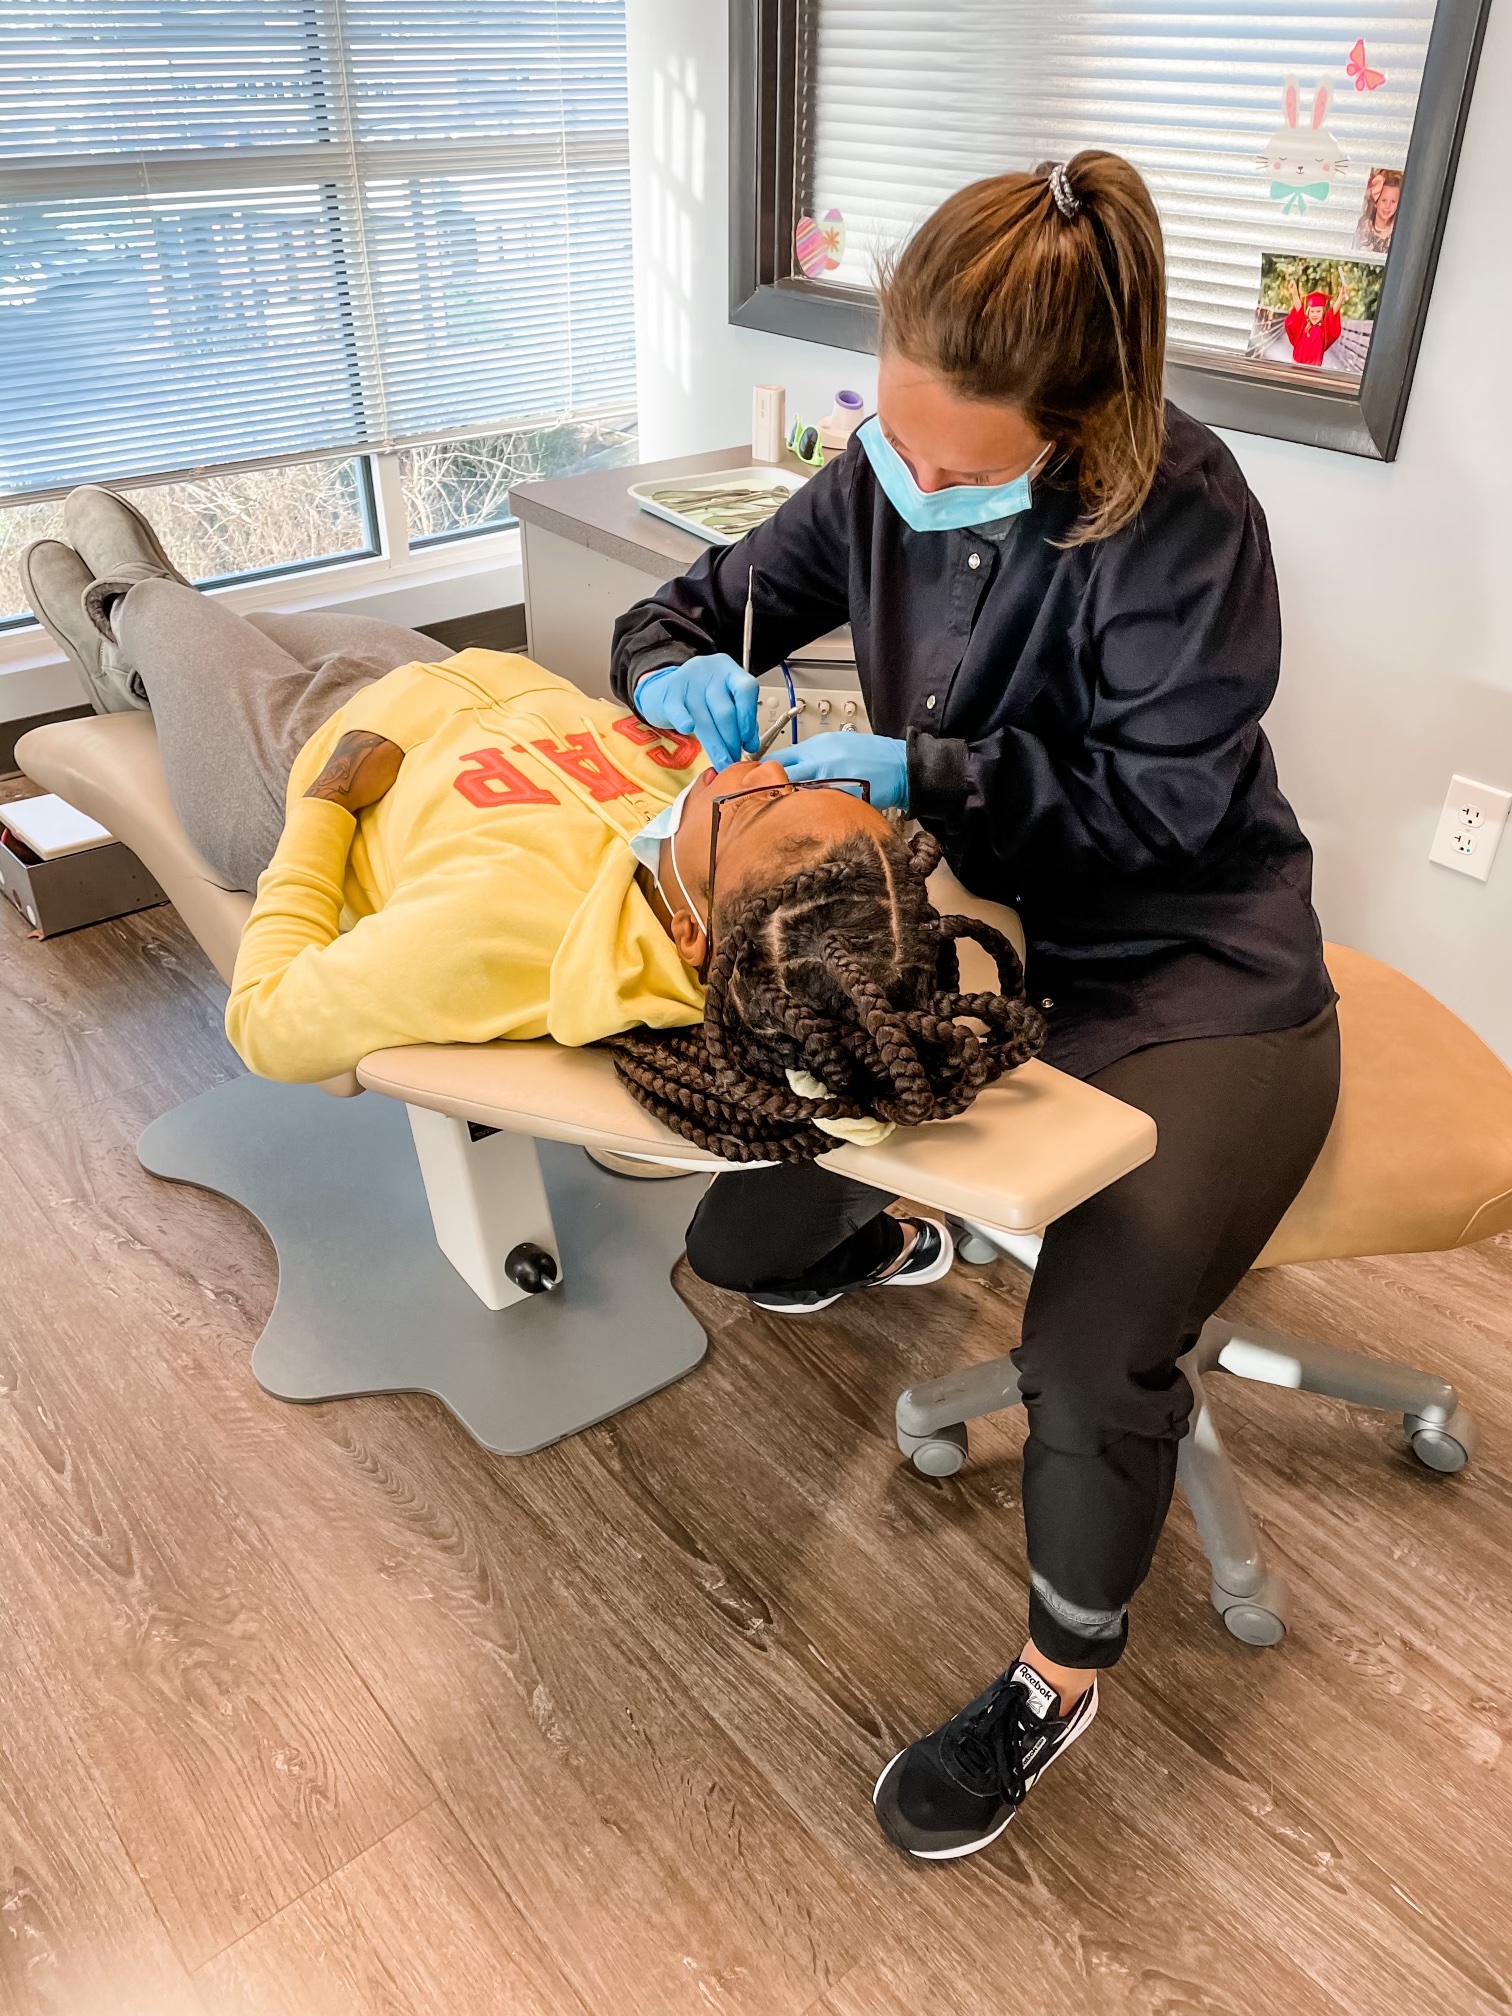 Orthodontics Assistant working on a patient in Concord North Carolina. This is near Kannapolis, Charlotte, Harrisburg, and Huntersville.